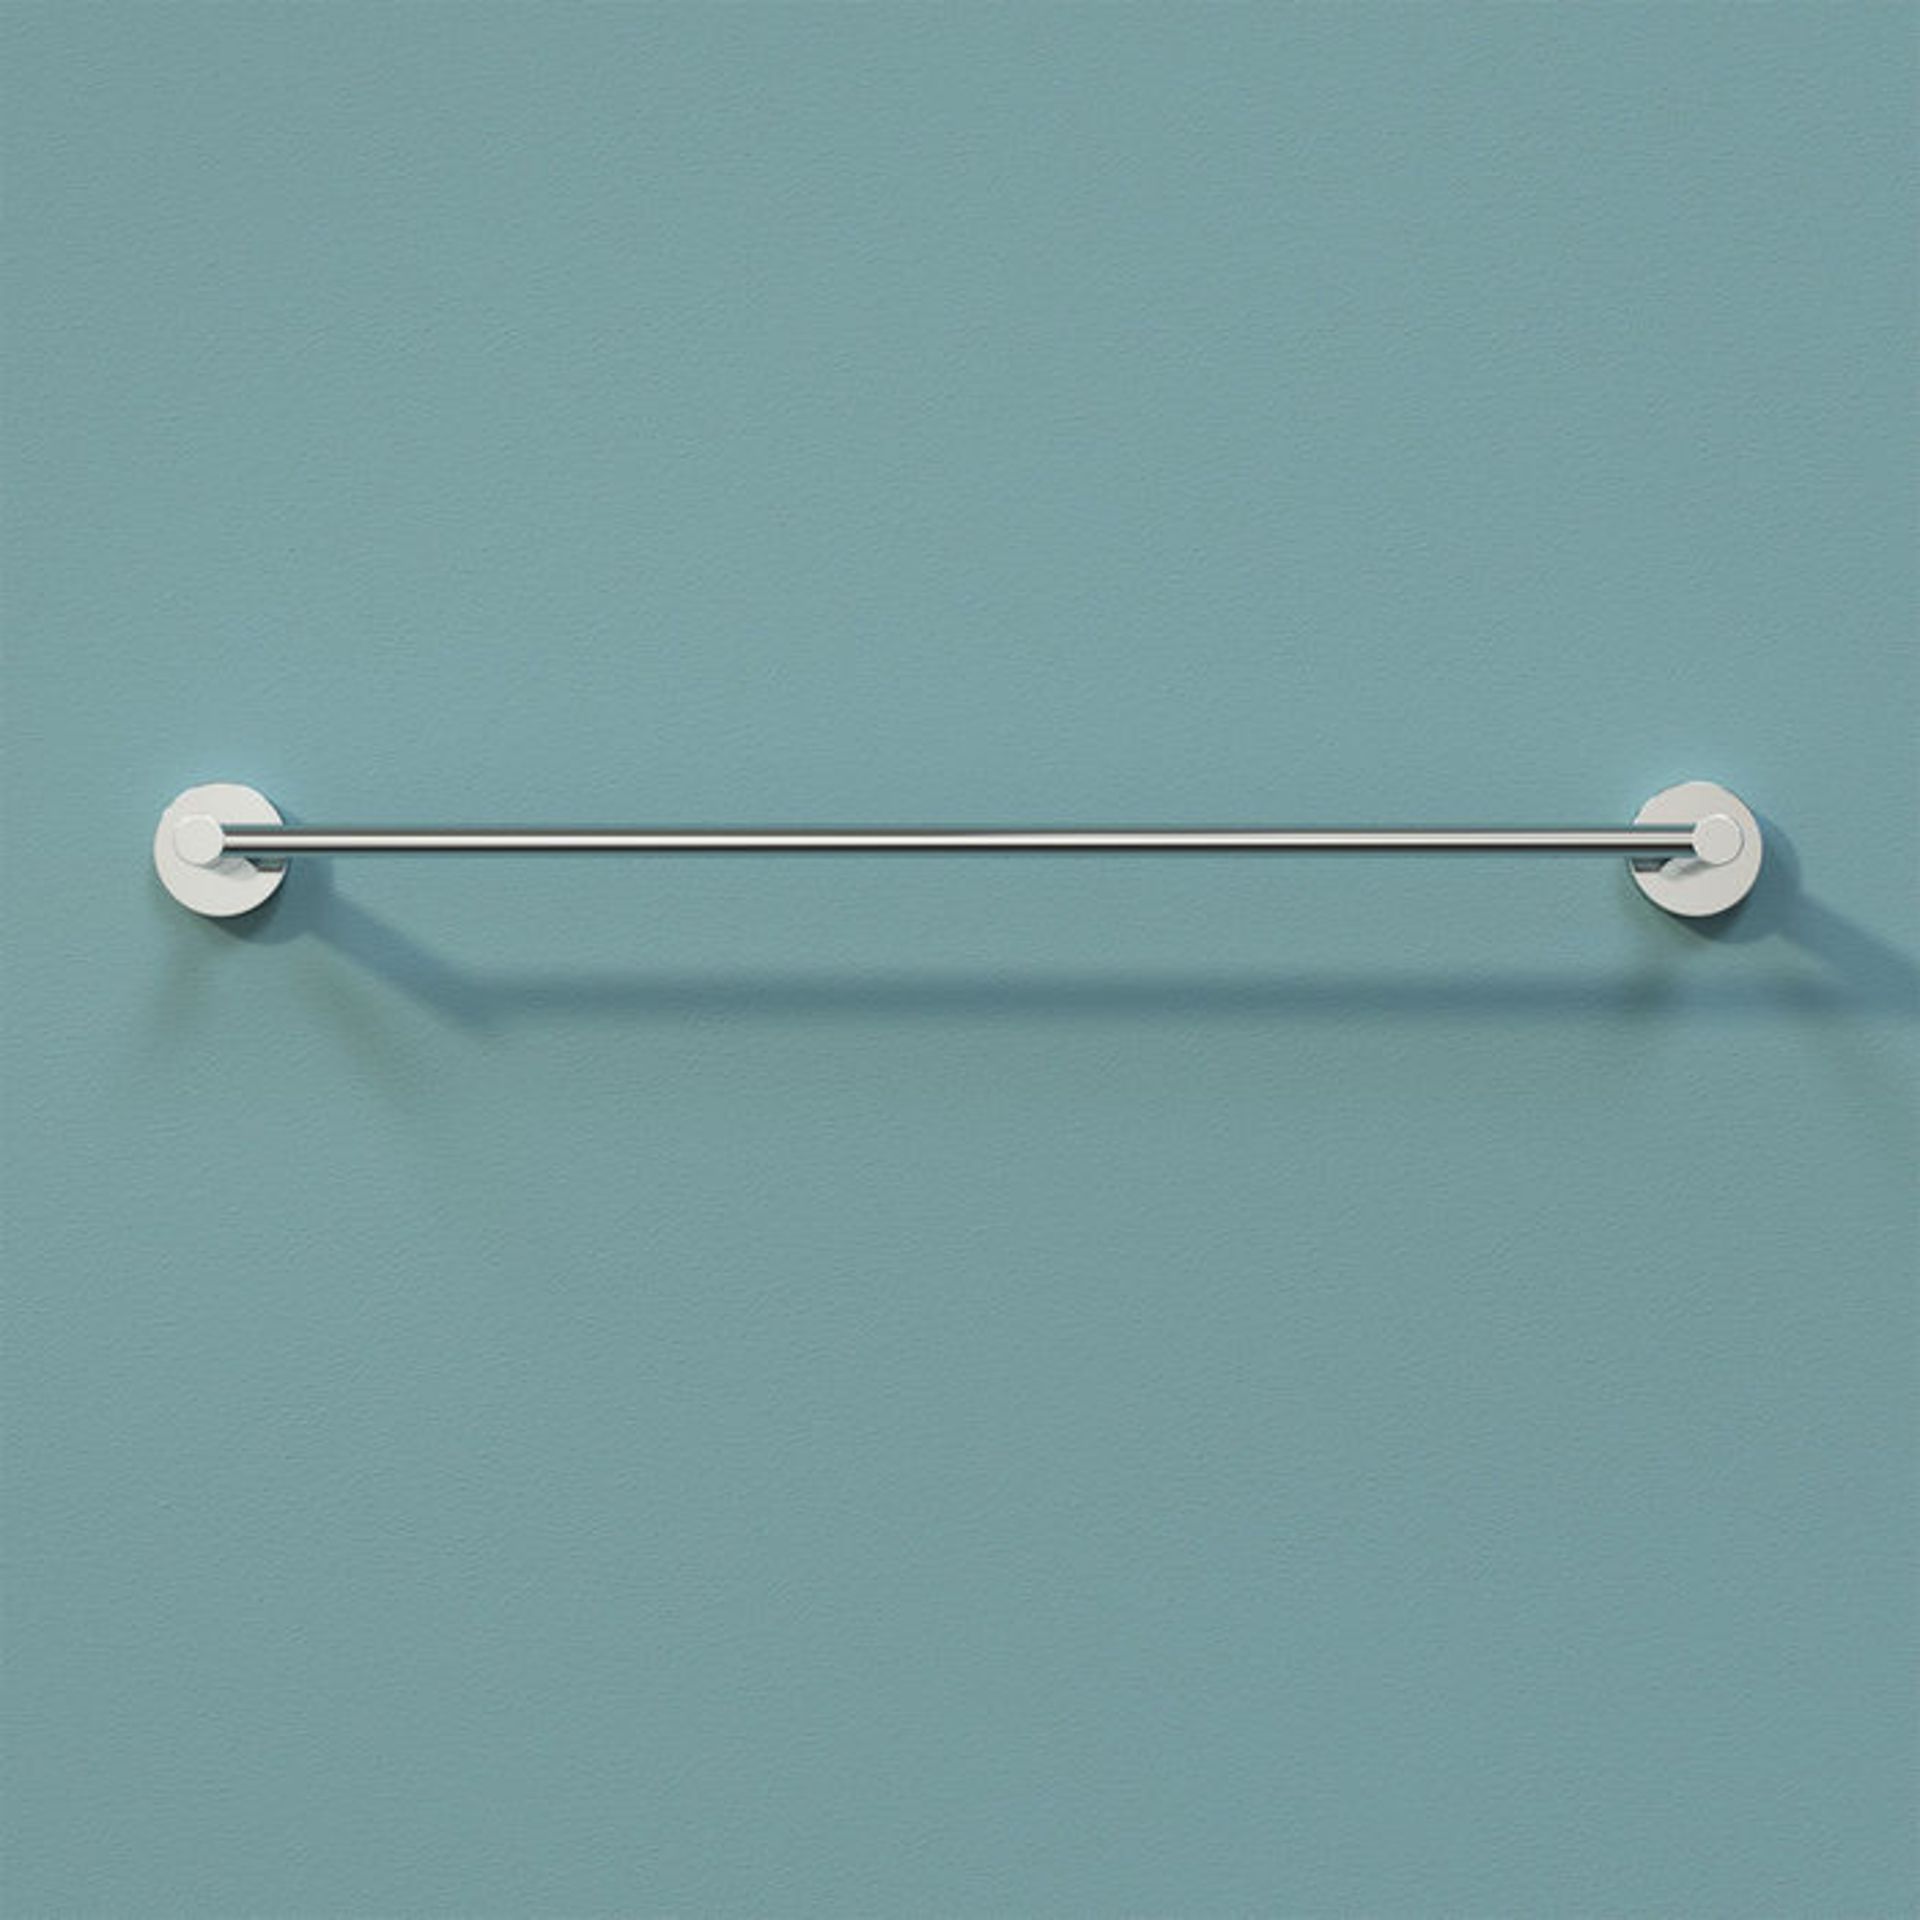 (NF116) Finsbury Towel Rail. Designed to conceal all fittings Completes your bathroom with a - Image 4 of 4